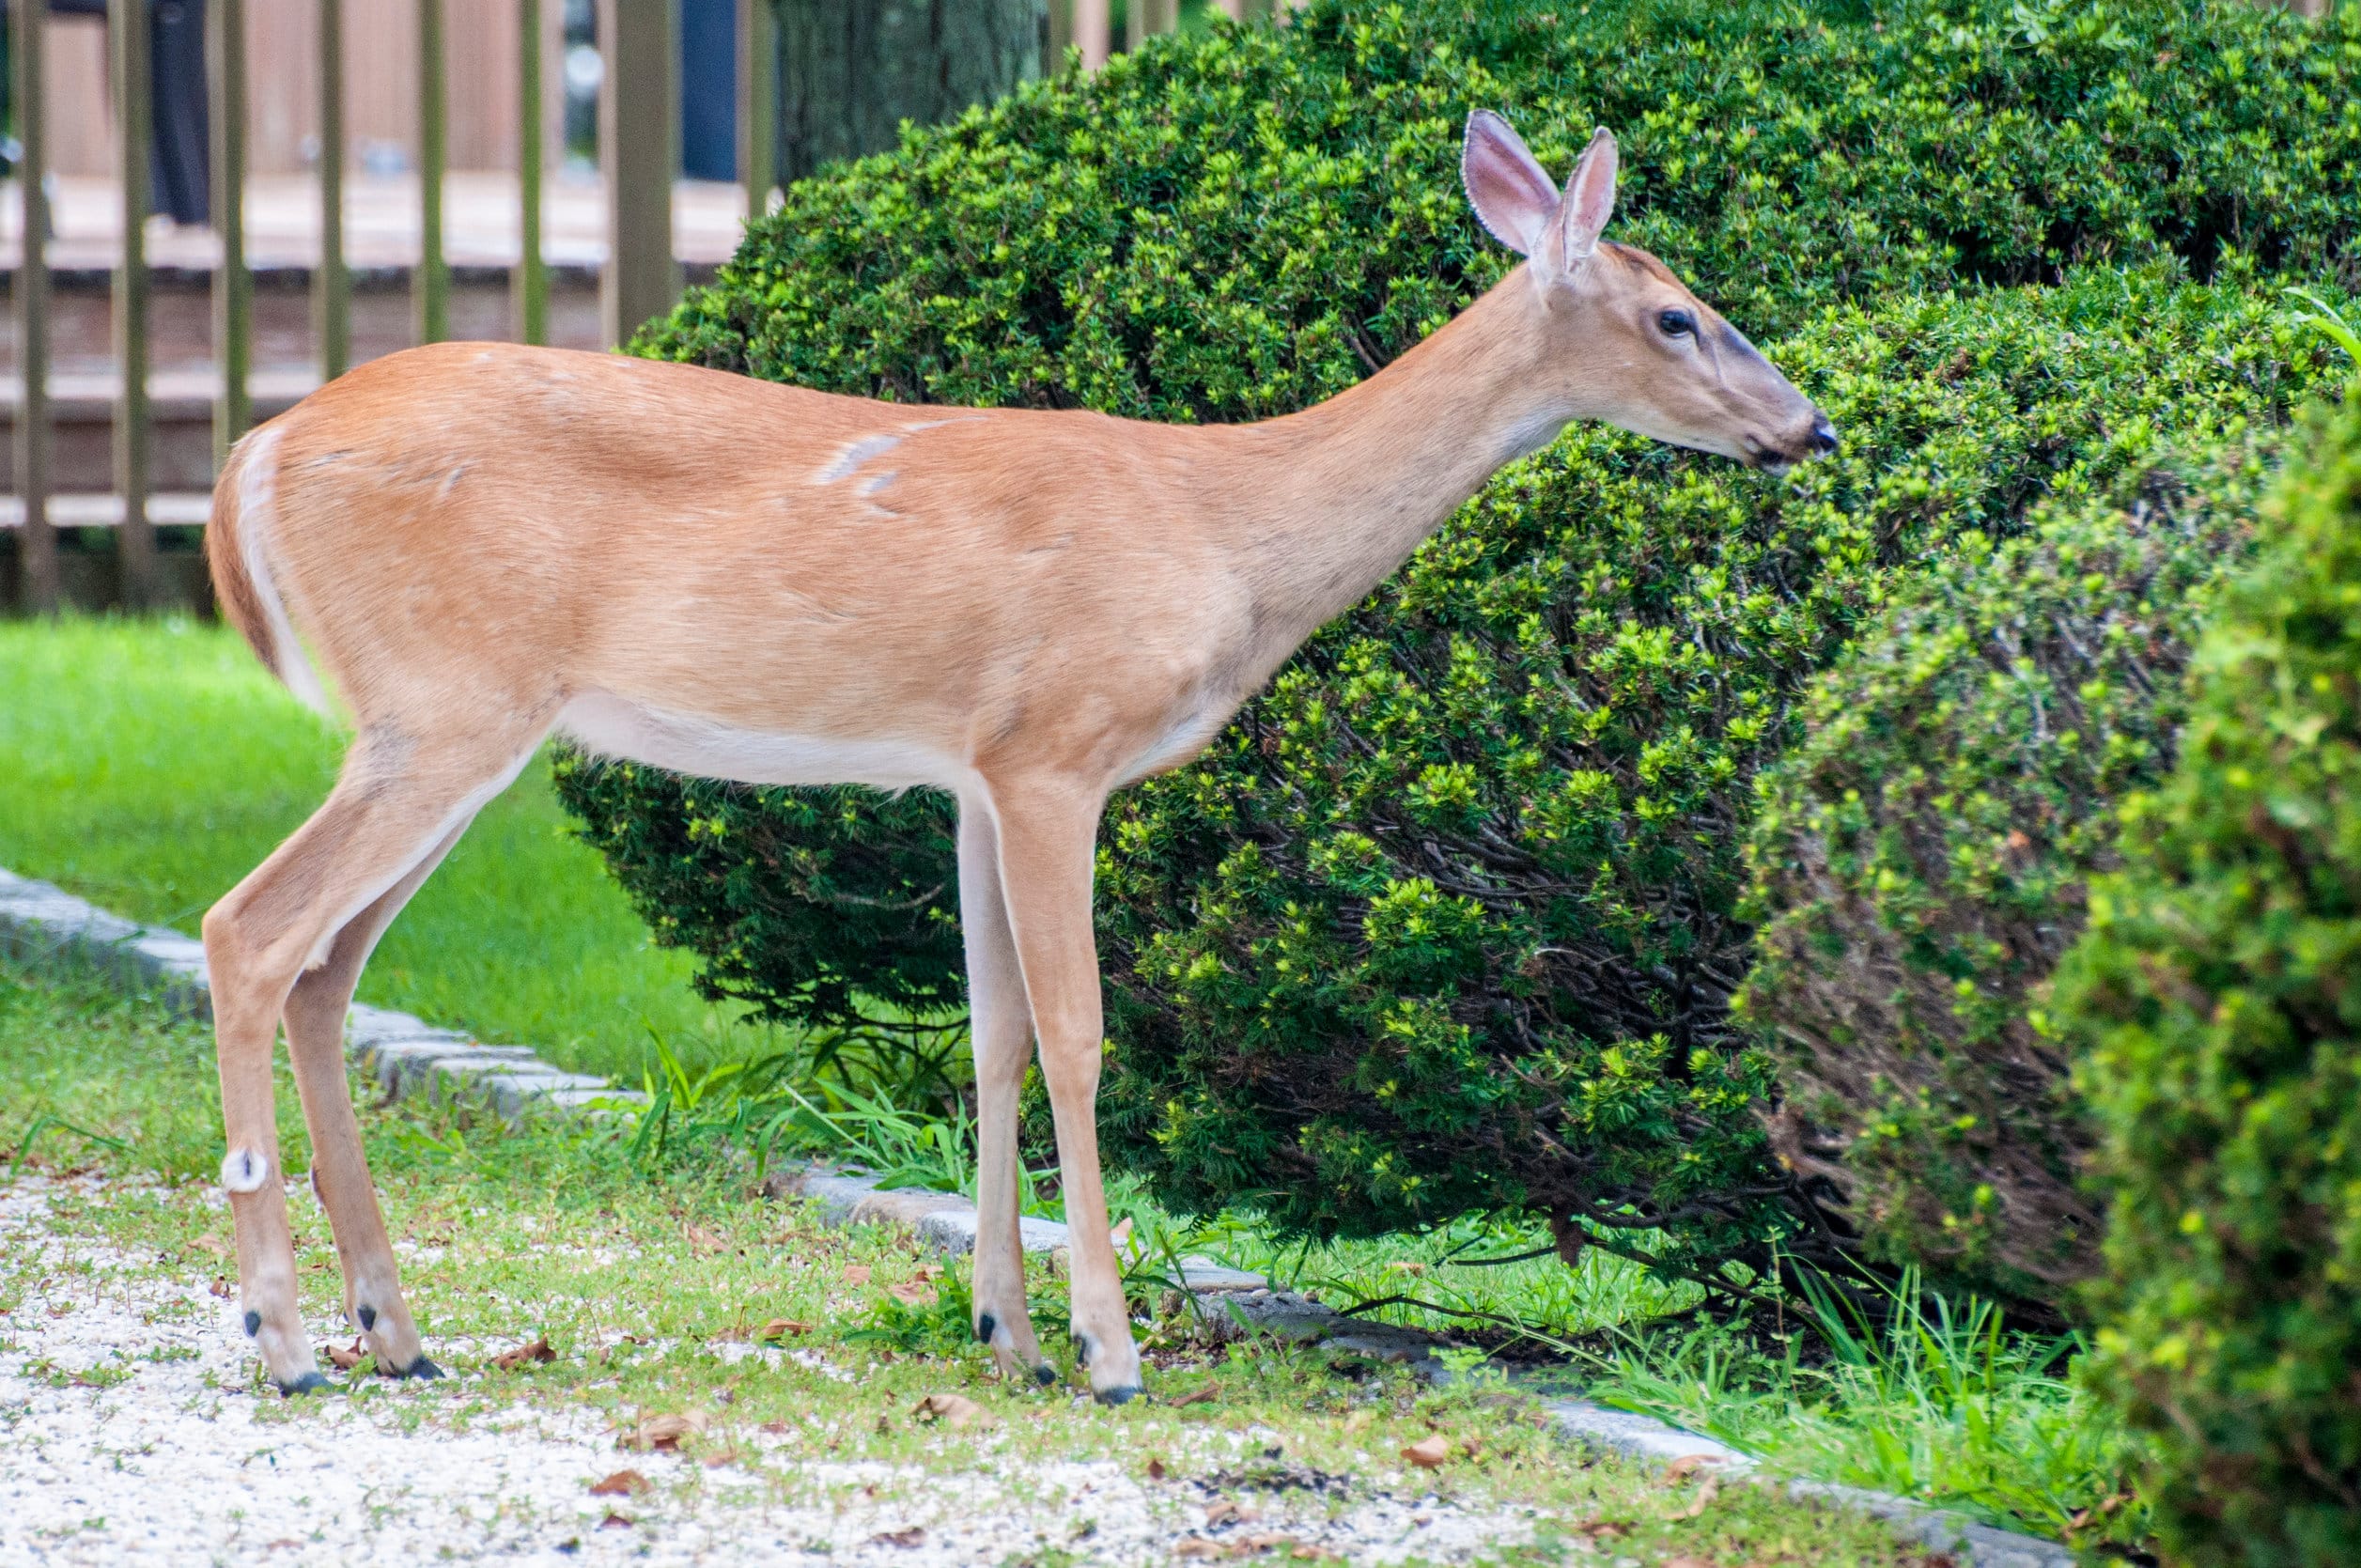 A deer in the yard munching on some shrubs